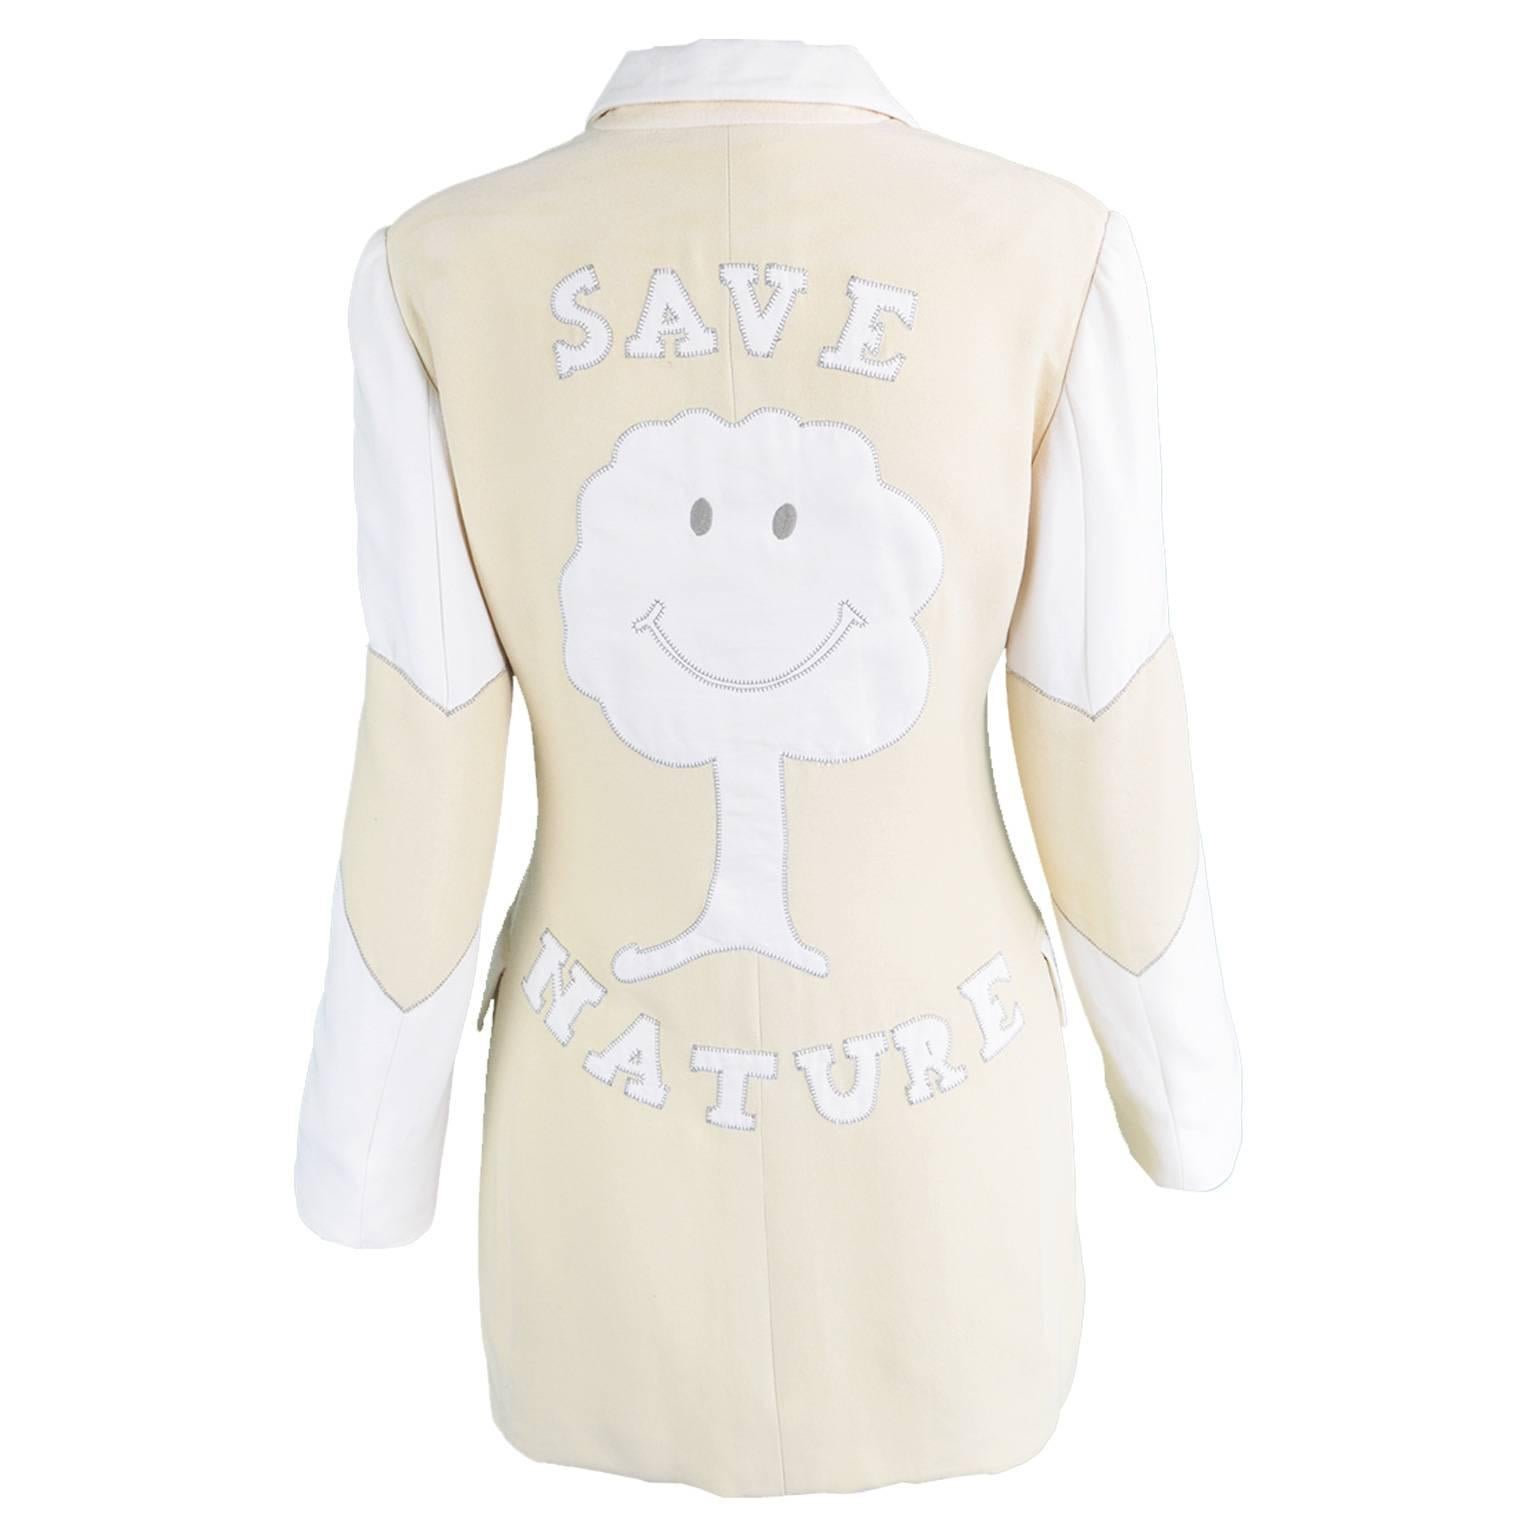 Moschino 'Save Nature' Eco-couture Jacket - Franco's Final Collection, 1994